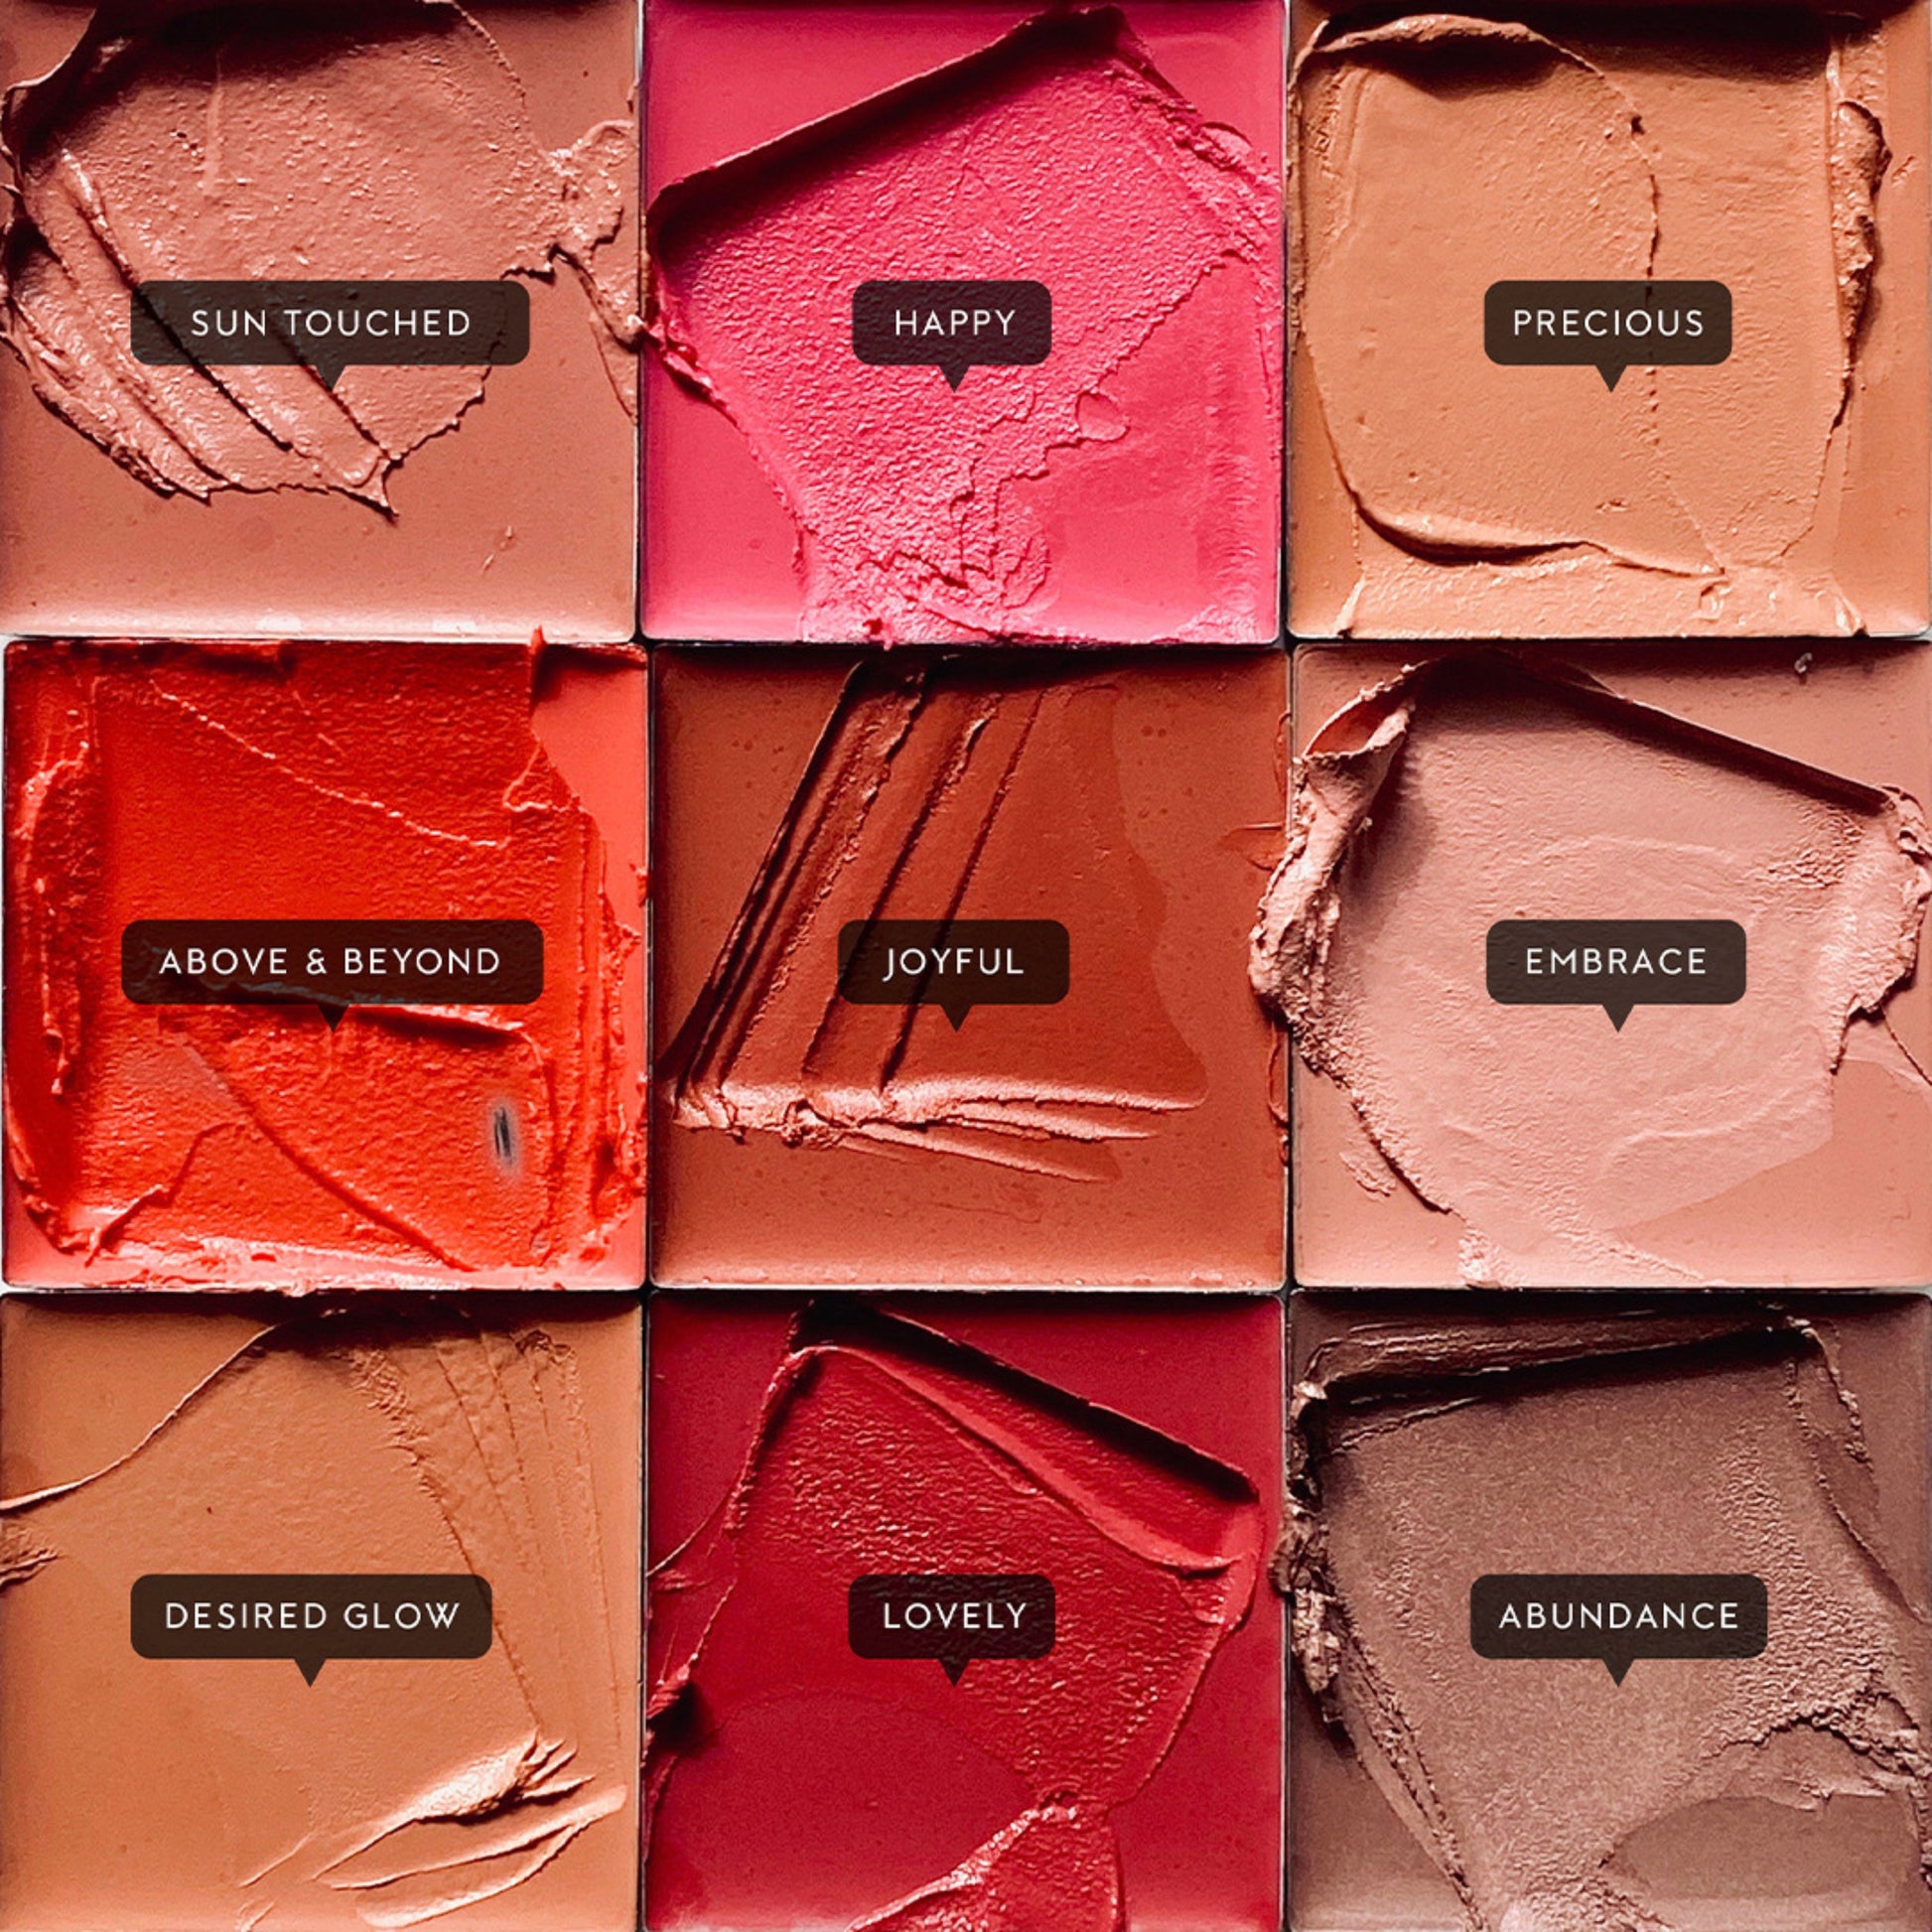 Nine different shades of cream blush. Happy is a vibrant pink shade.   